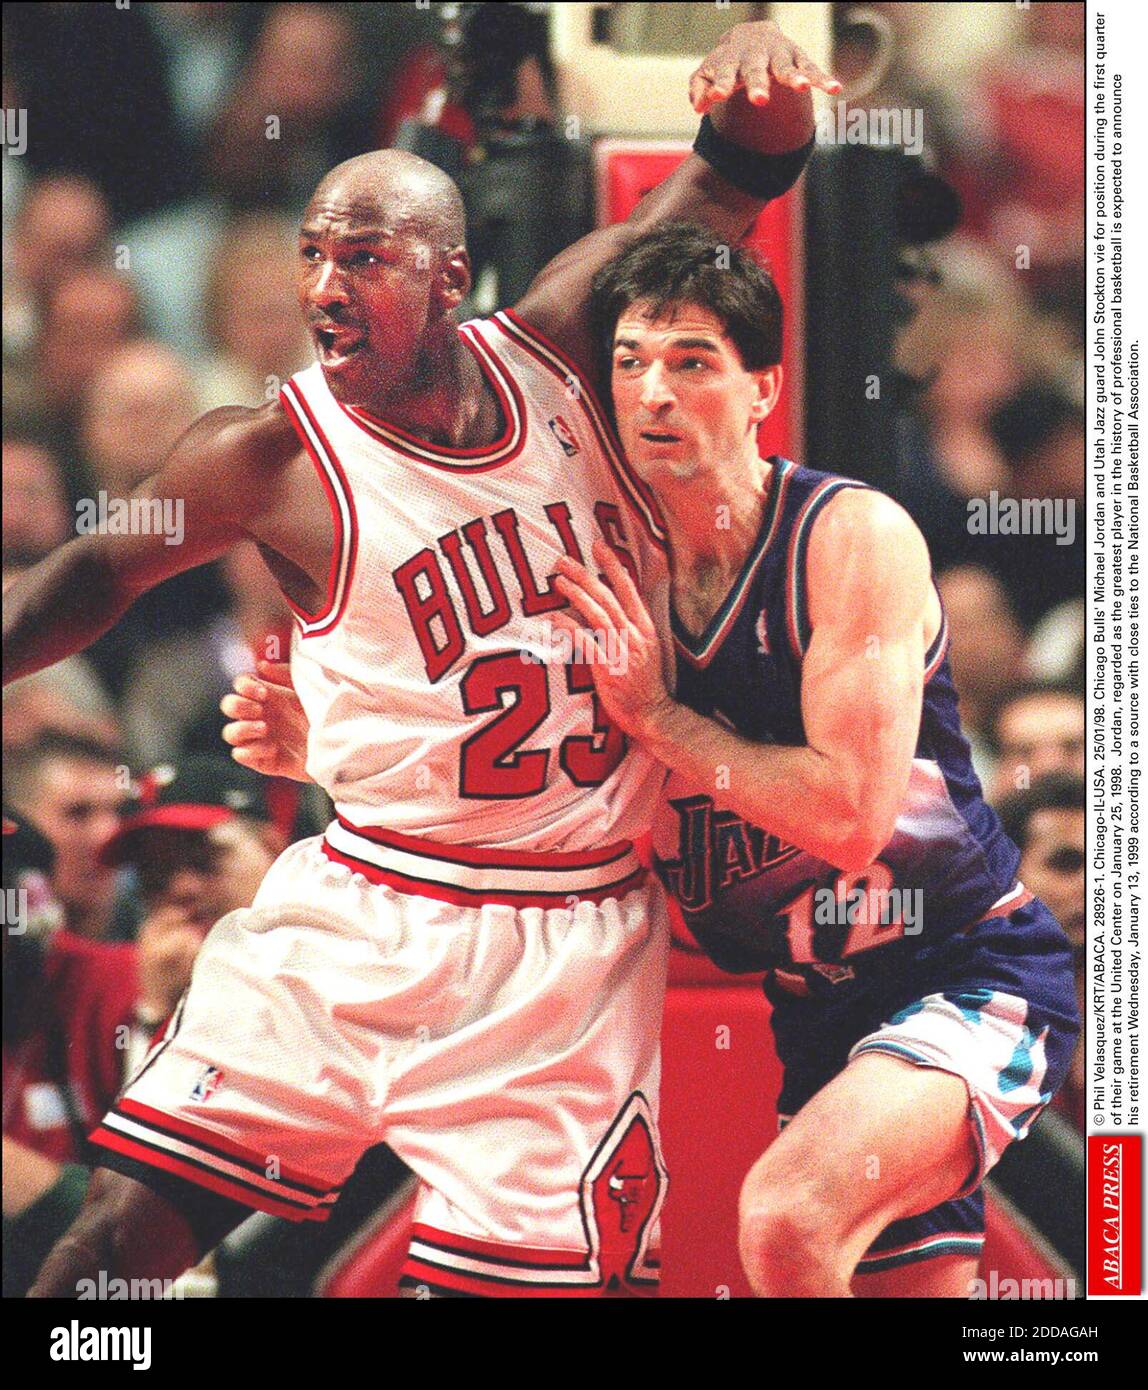 NO FILM, NO VIDEO, NO TV, NO DOCUMENTARY - © Phil Velasquez/KRT/ABACA. 28926-1. Chicago-IL-USA. 25/01/98. Chicago Bulls' Michael Jordan and Utah Jazz guard John Stockton vie for position during the first quarter of their game at the United Center on January 25, 1998. Jordan, regarded as the greate Stock Photo